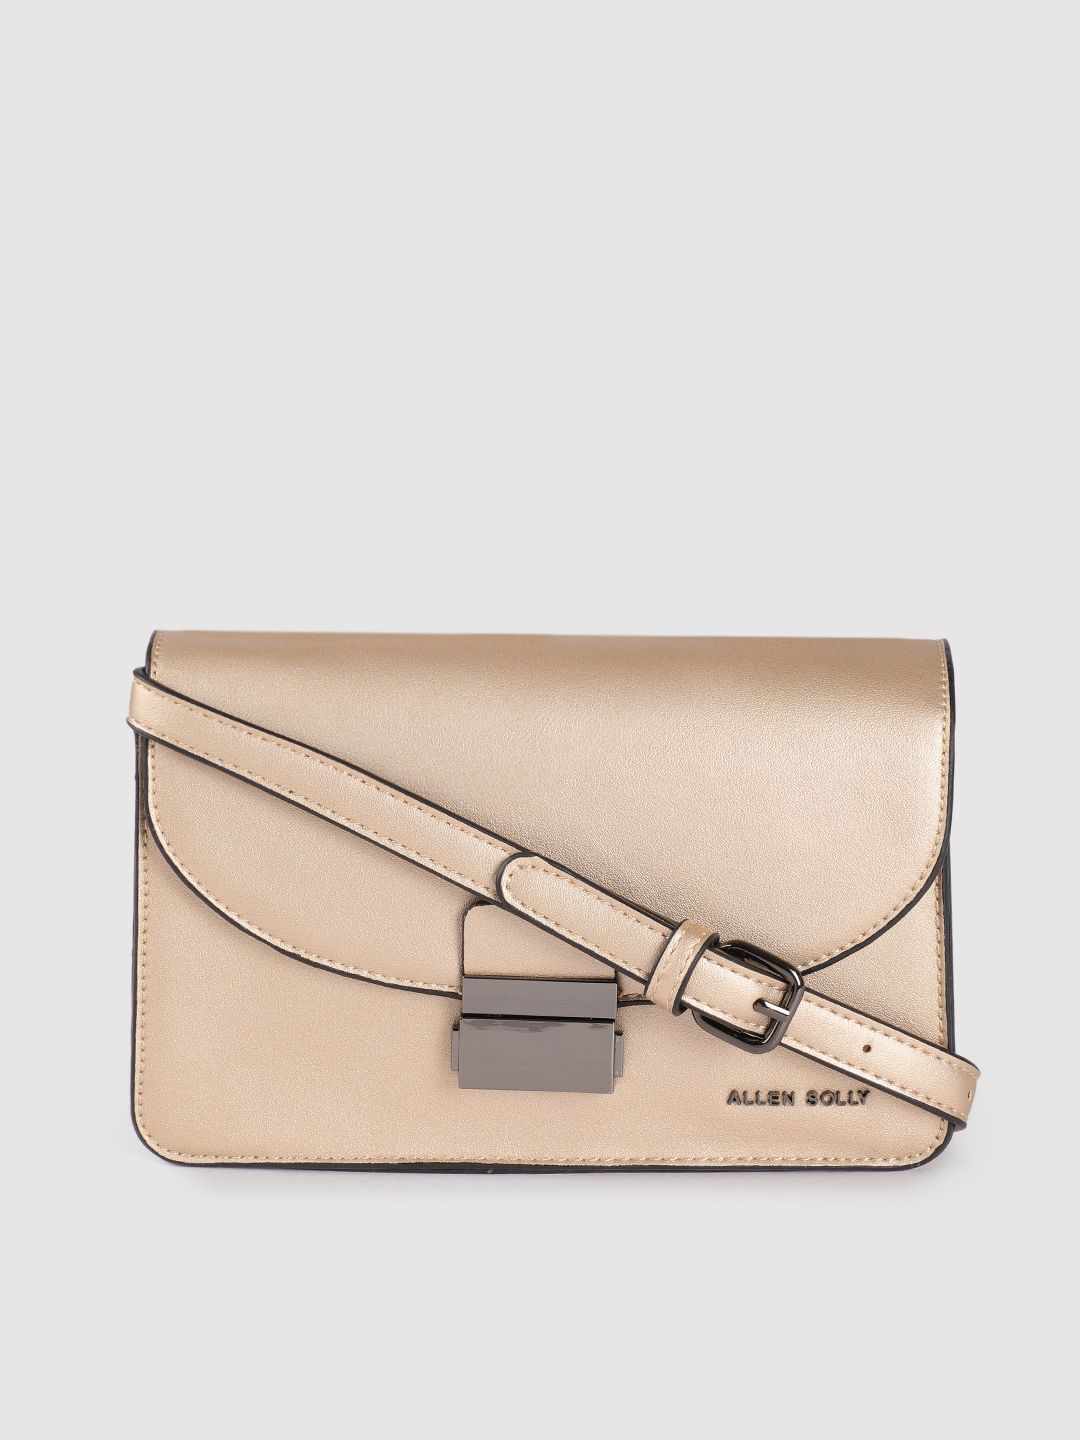 Allen Solly Rose Gold PU Structured Sling Bag Price in India